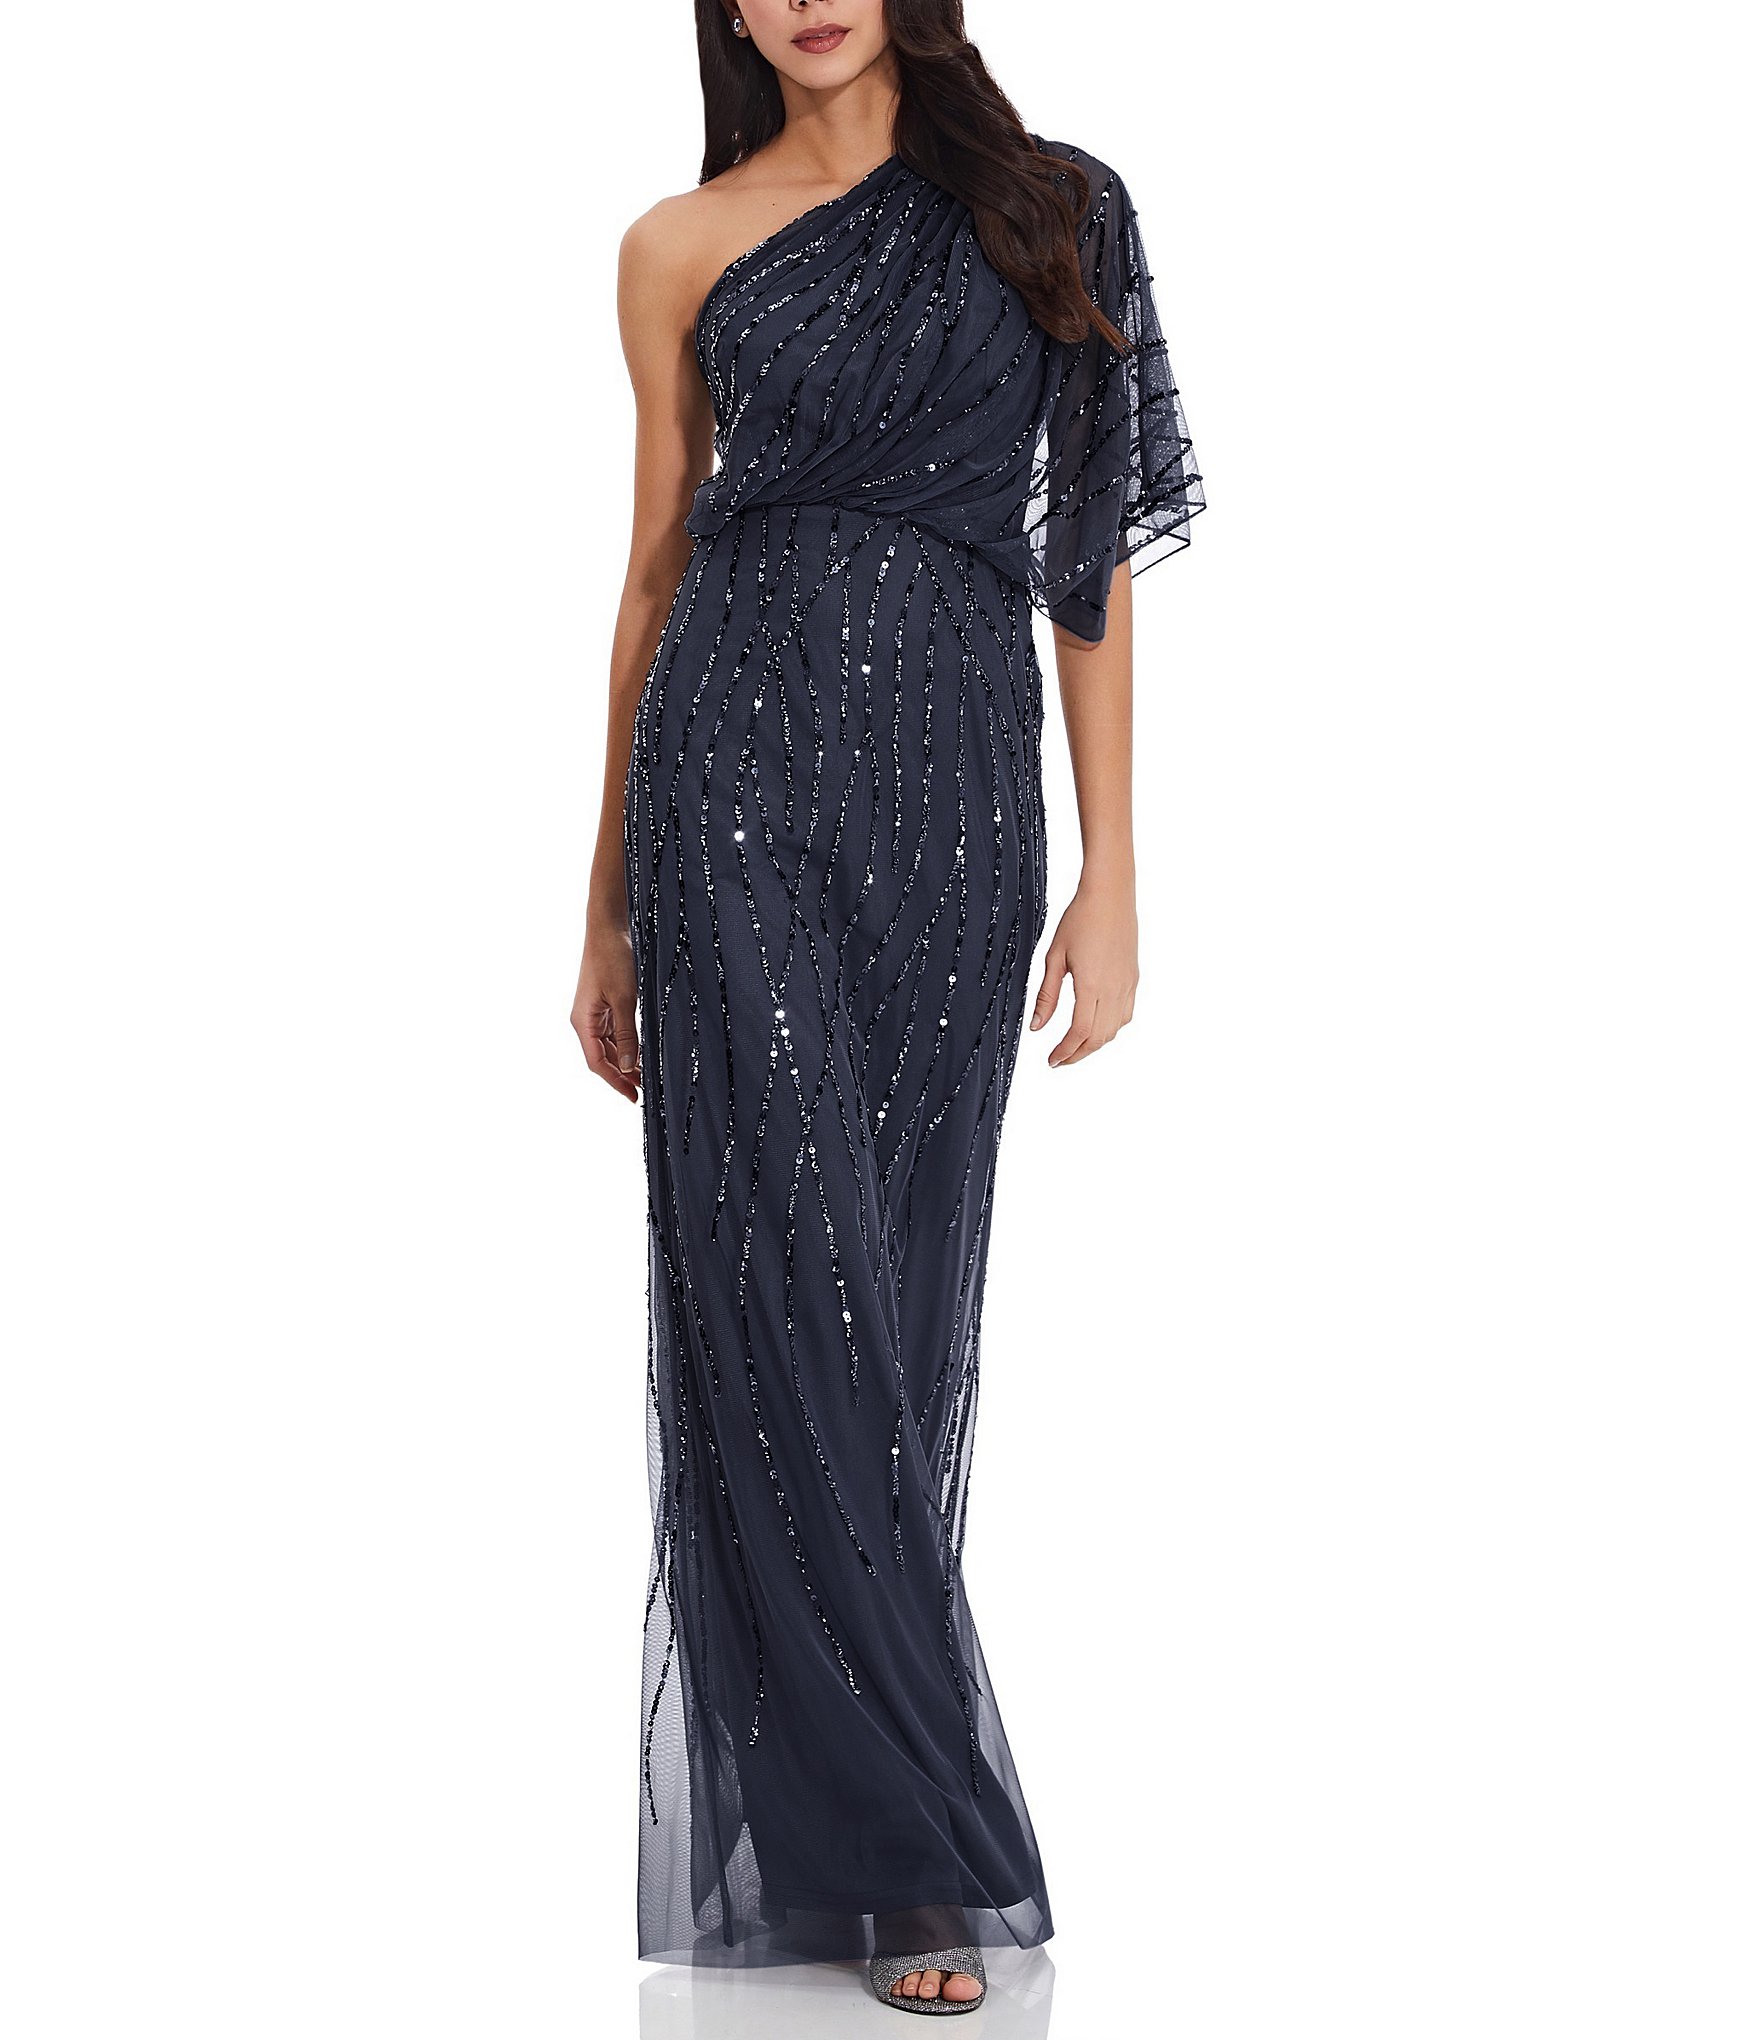 Adrianna Papell Sequin One Shoulder Illusion Sleeve Gown | Dillard's